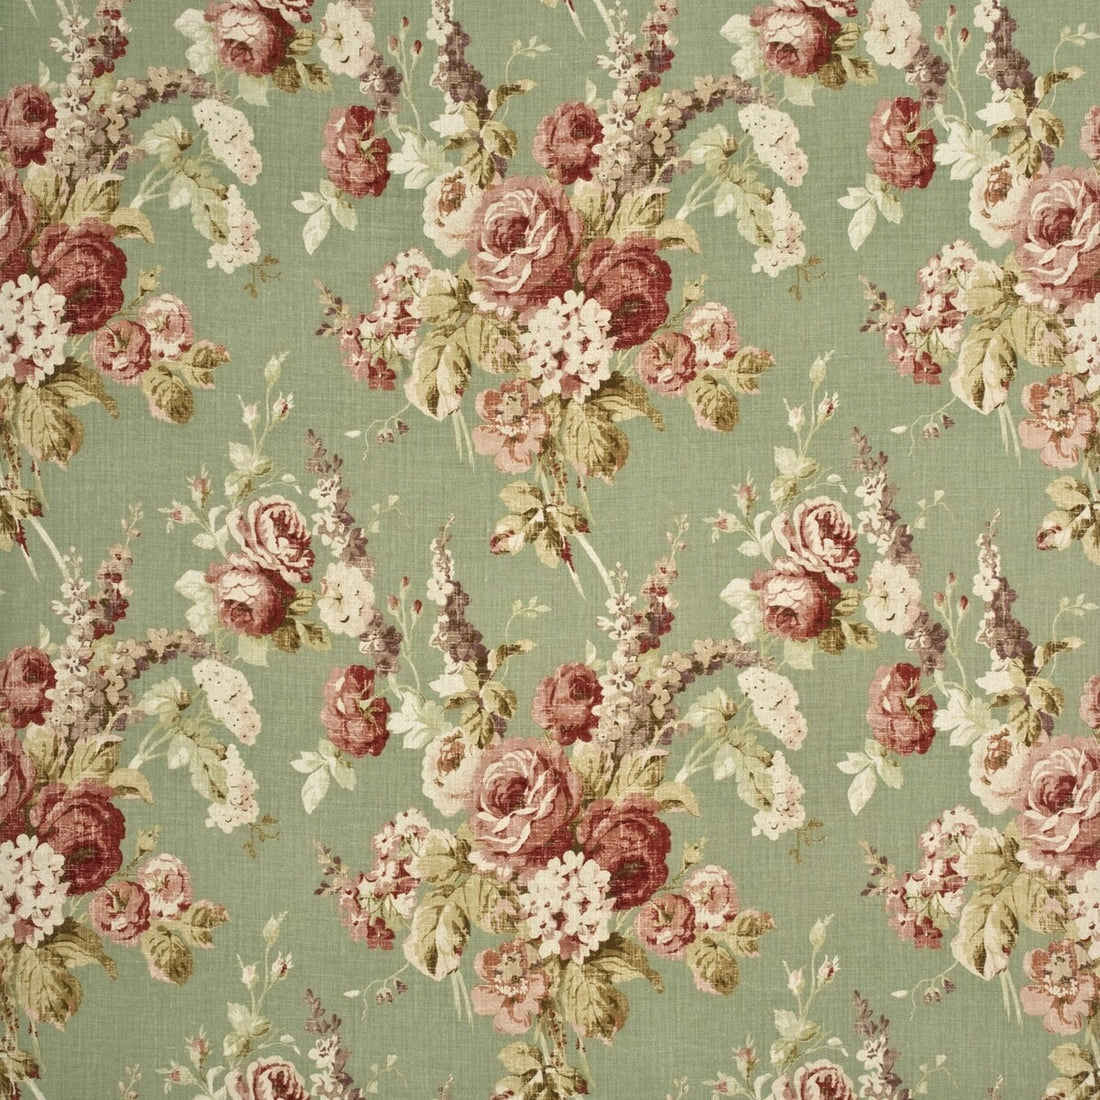 Vintage Floral fabric in coral/sage color - pattern FD264.S38.0 - by Mulberry in the Country Weekend collection